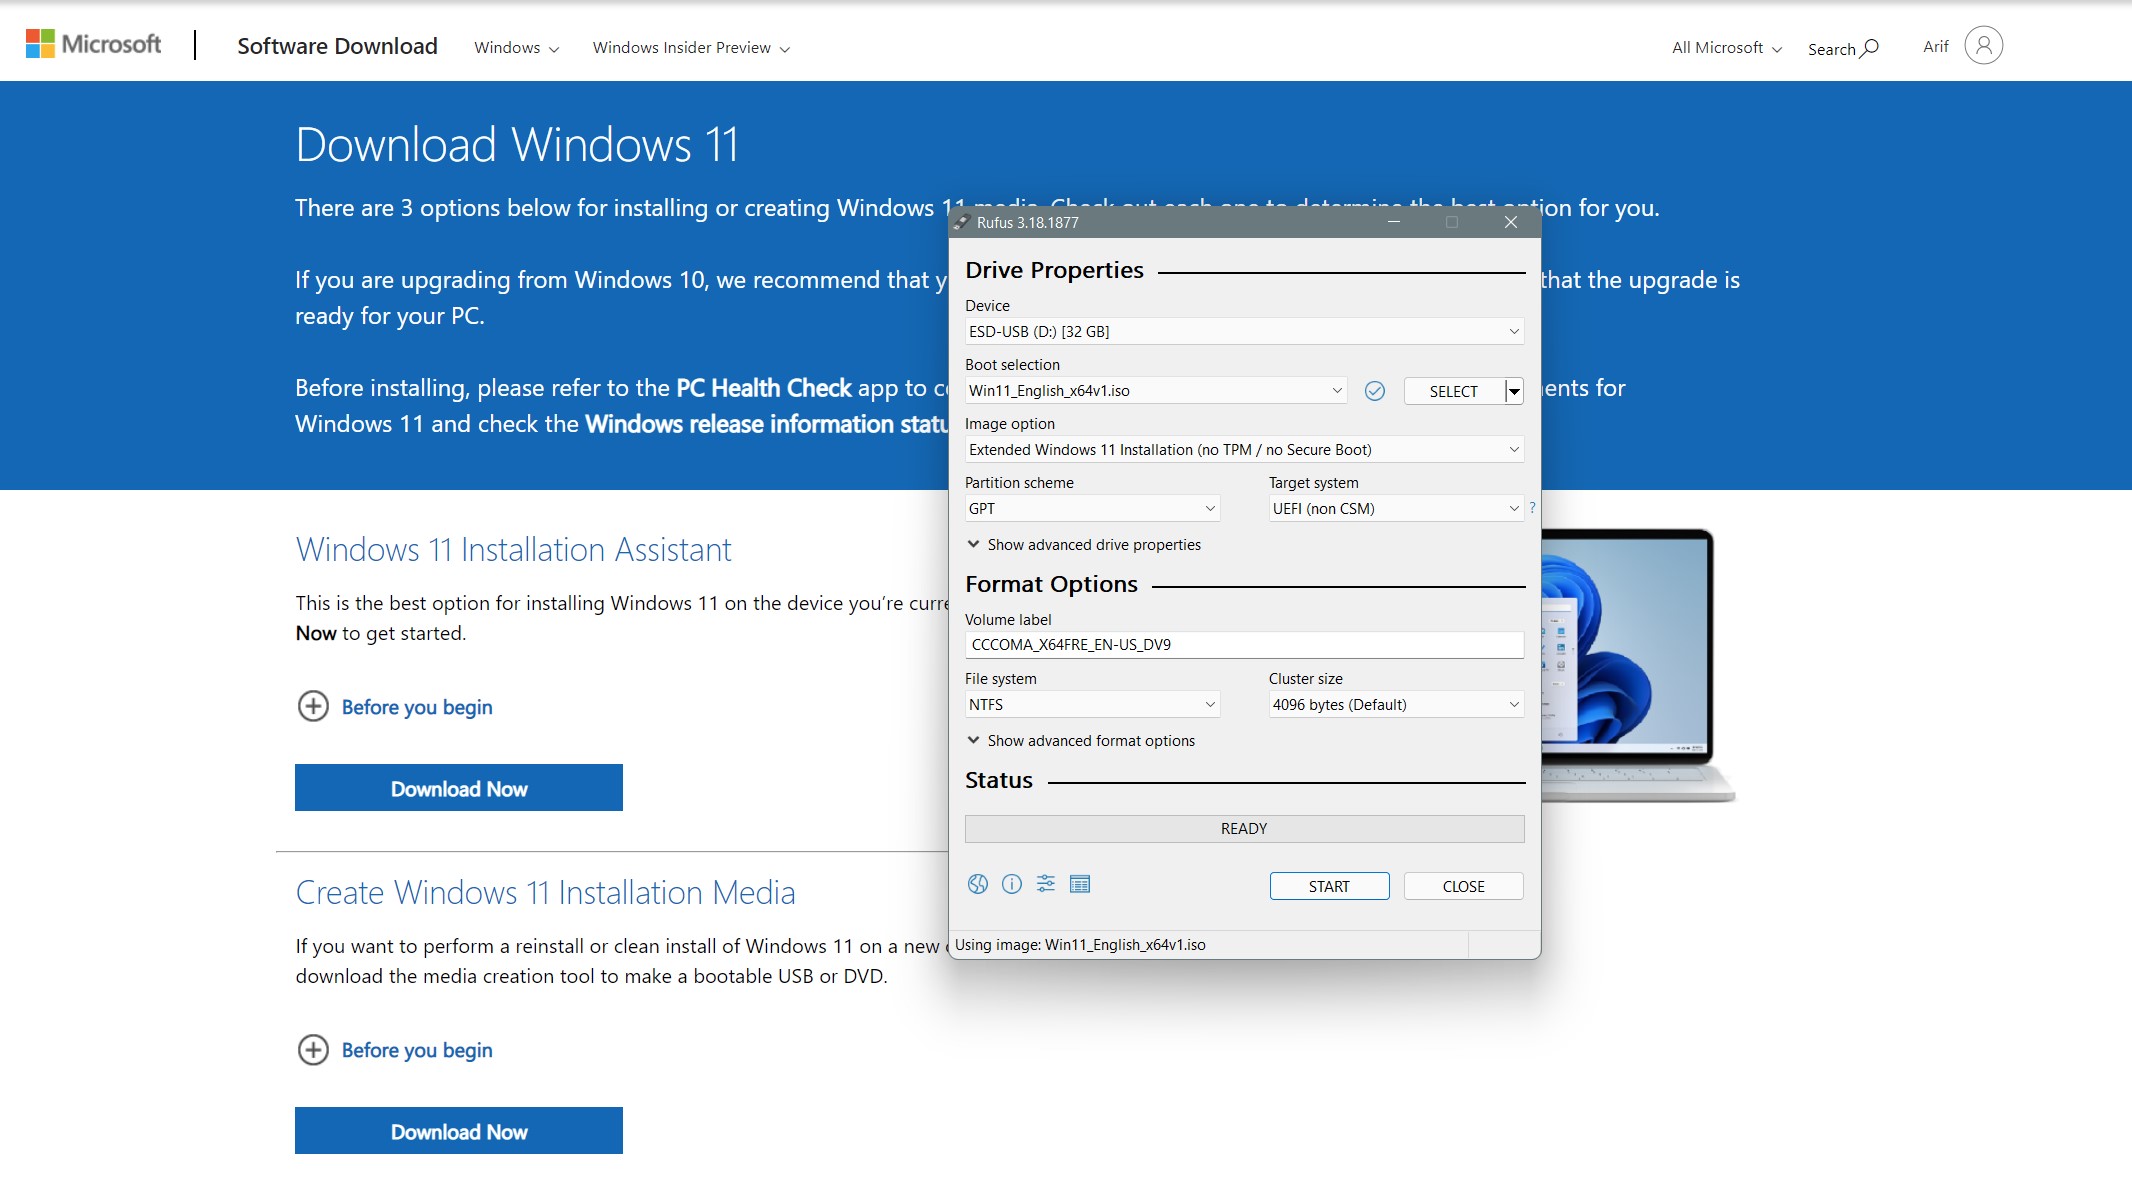 How To Easily Create A Custom Windows 11 Install That Skips TPM And Other  Requirements